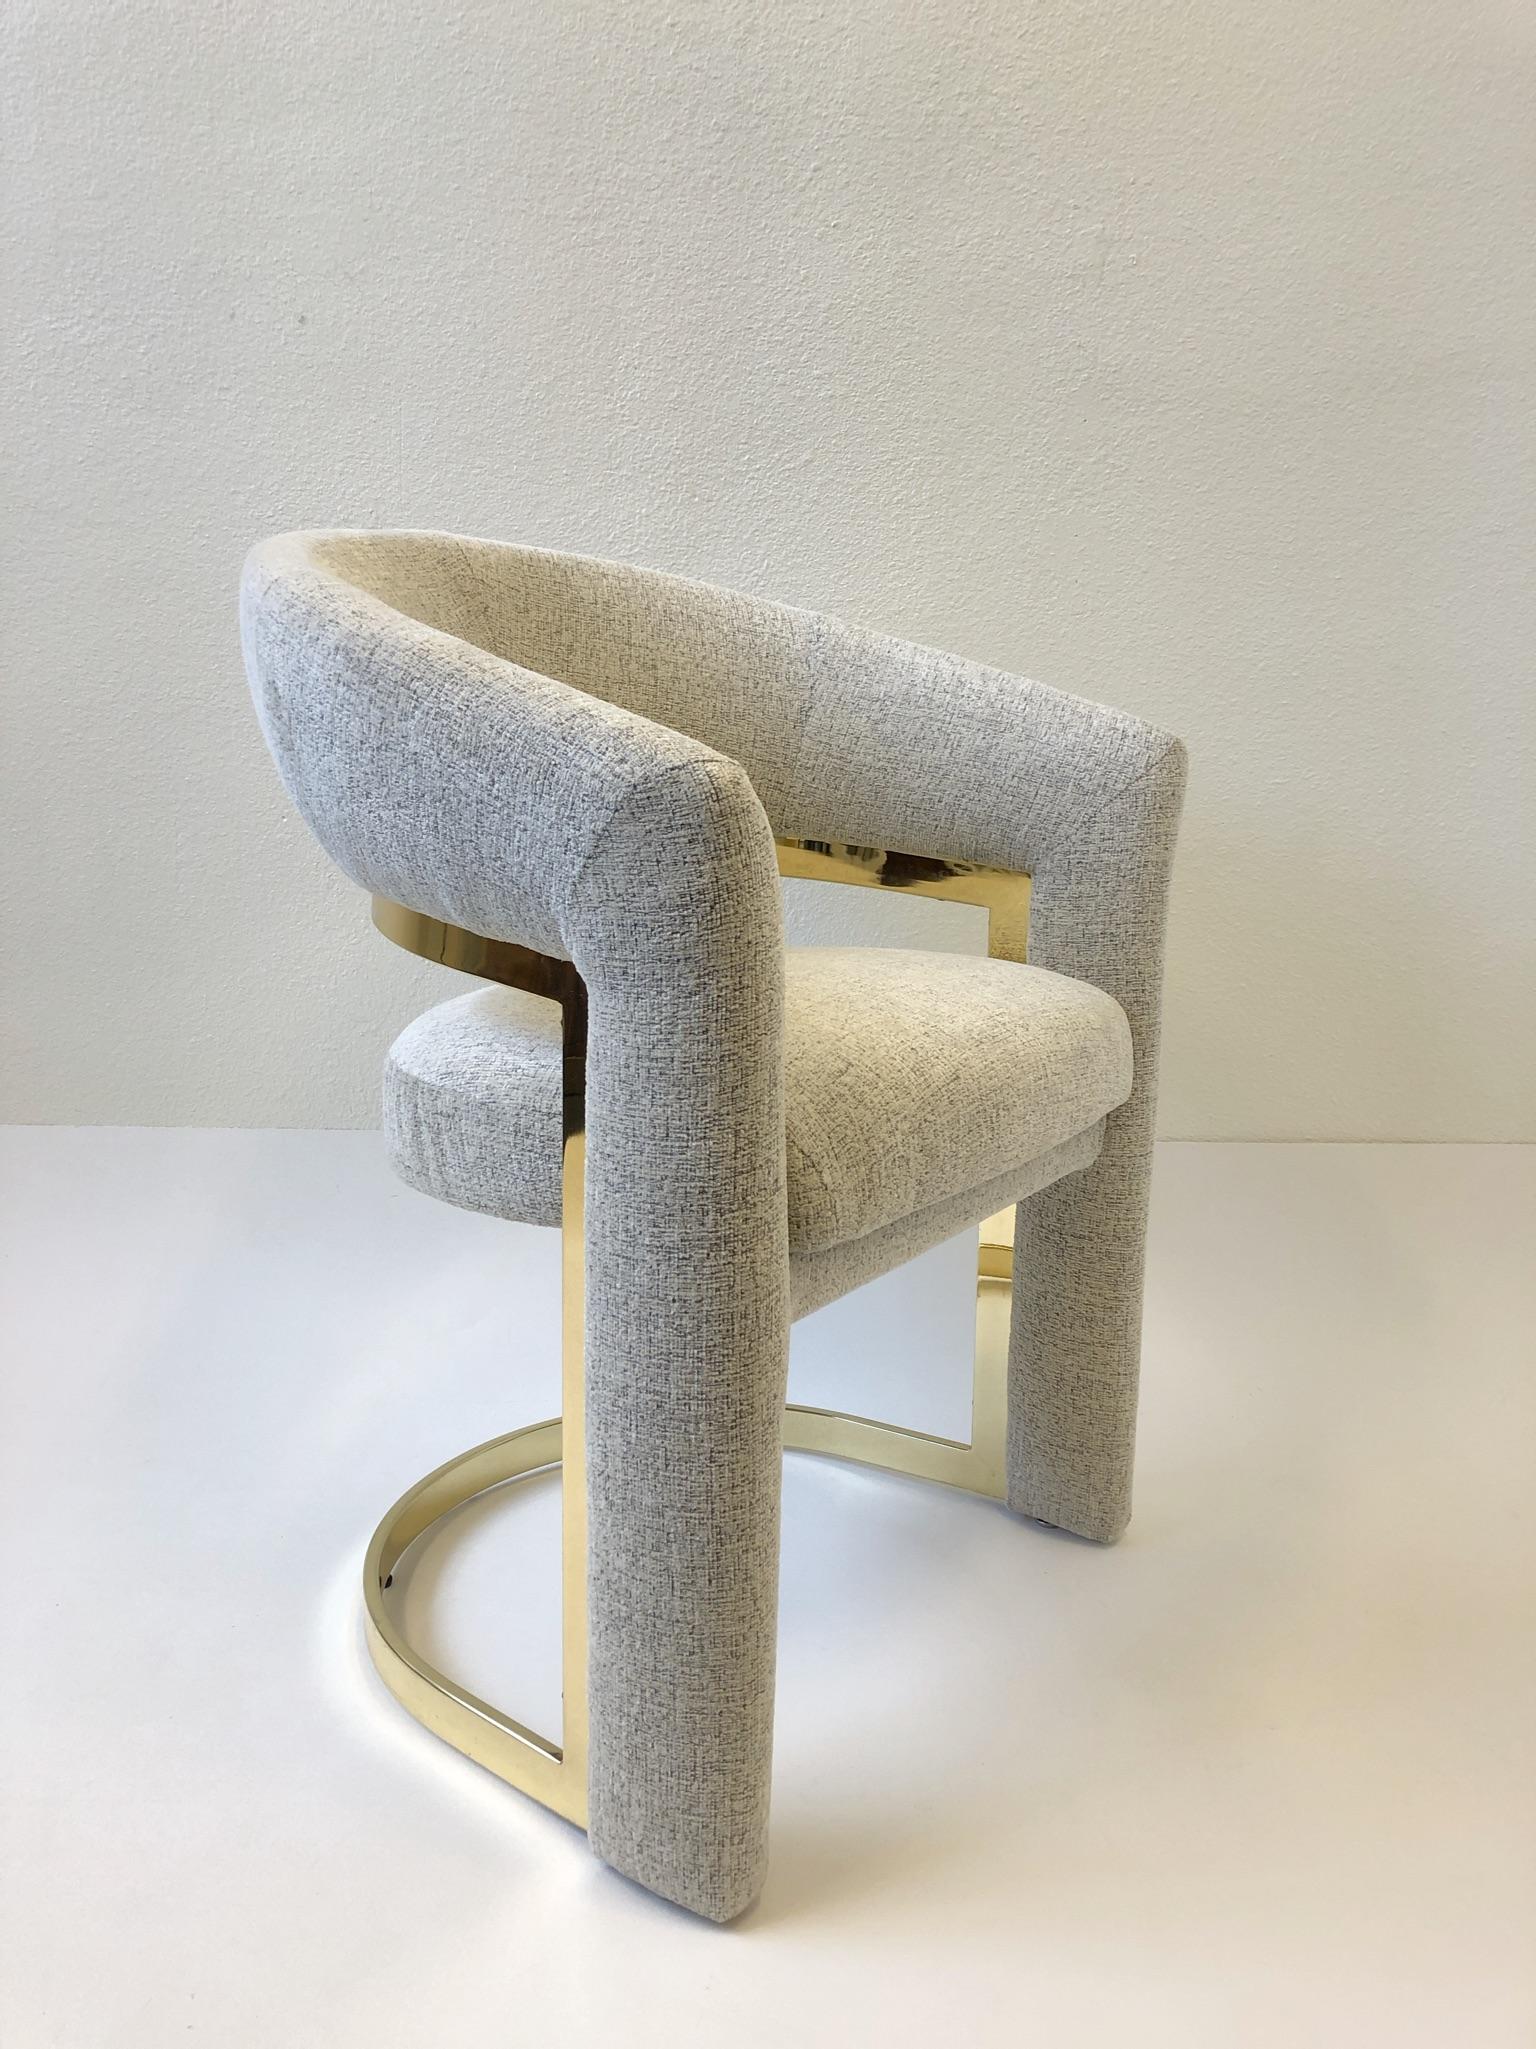 A set of four glamorous polish brass dining chairs designed in the 1980s by Design Institute of America. The chairs have been newly recovered in a soft off white with hints of light brown threads chenille tweed fabric. The brass is in original